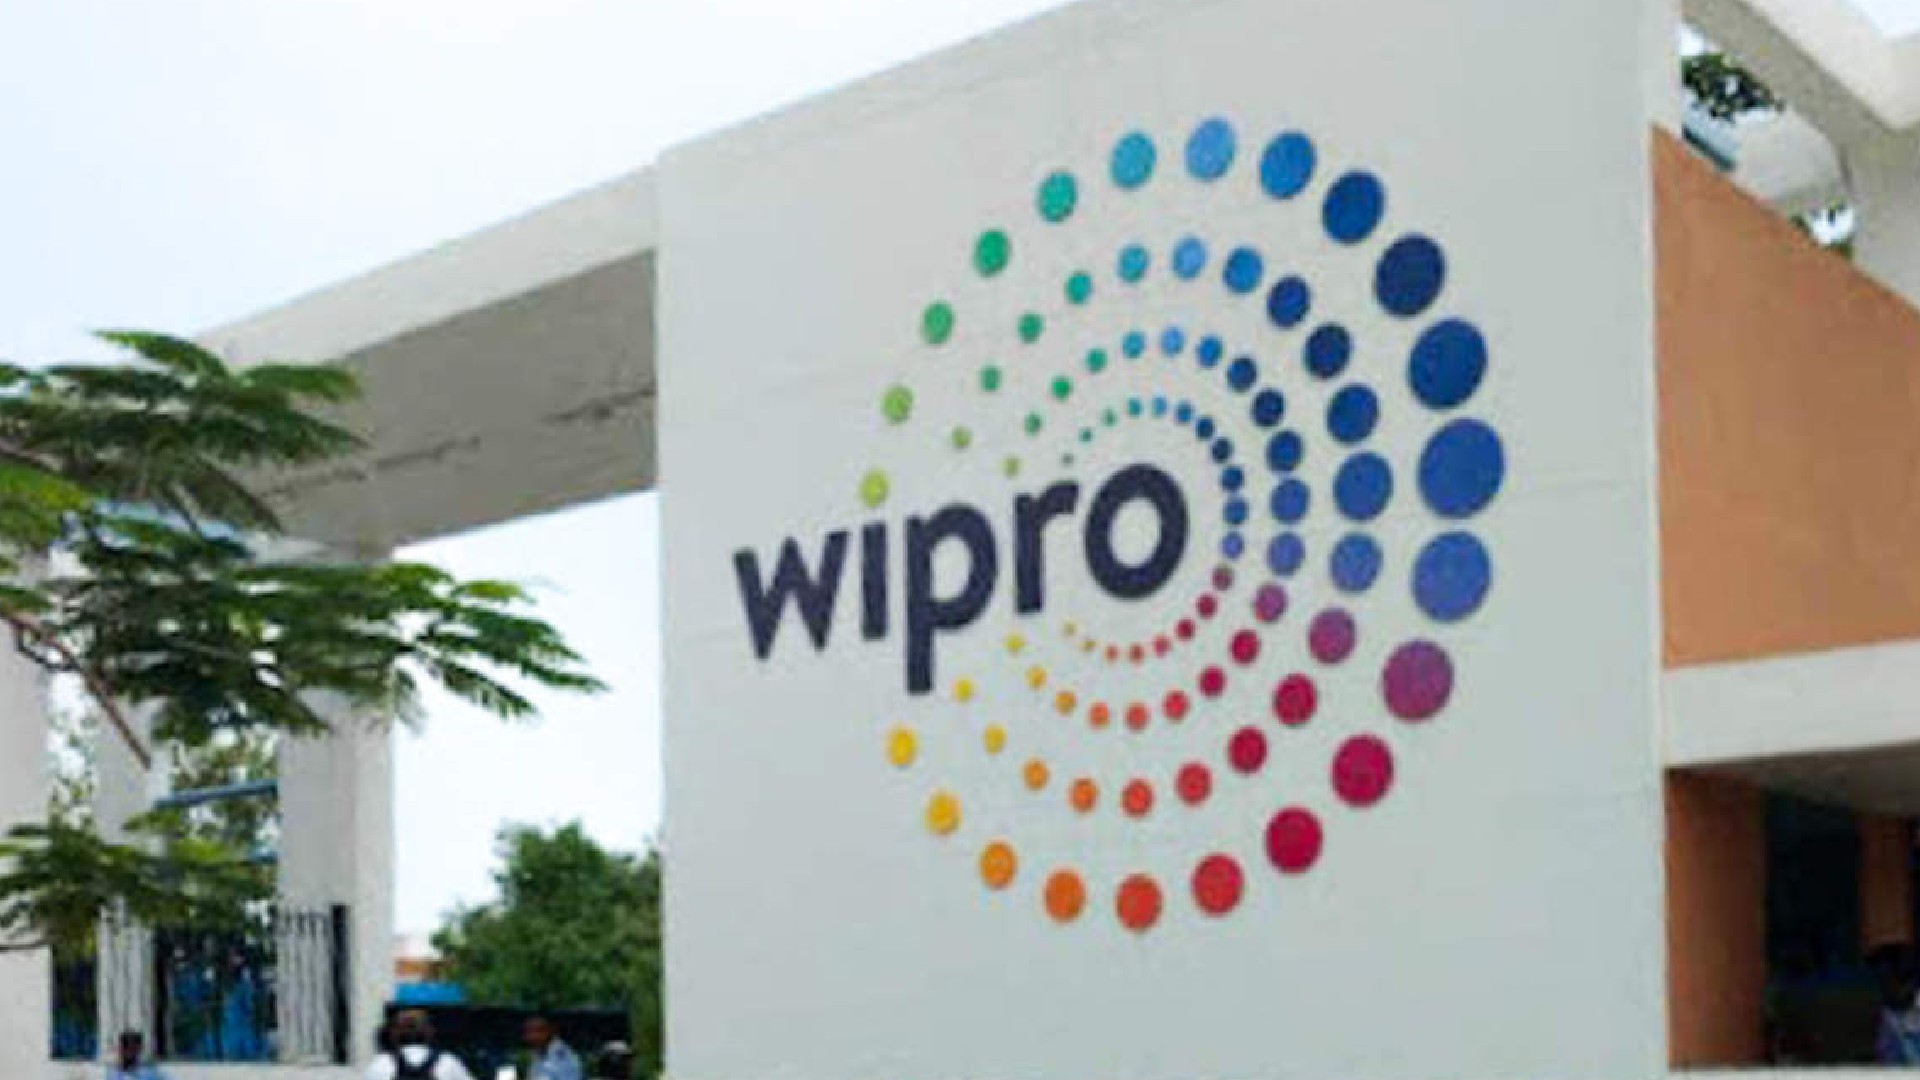 Wipro Hiring Graduates From All Streams: Offers Rs 5 Lakh Package For Freshers! Check Your Eligibility